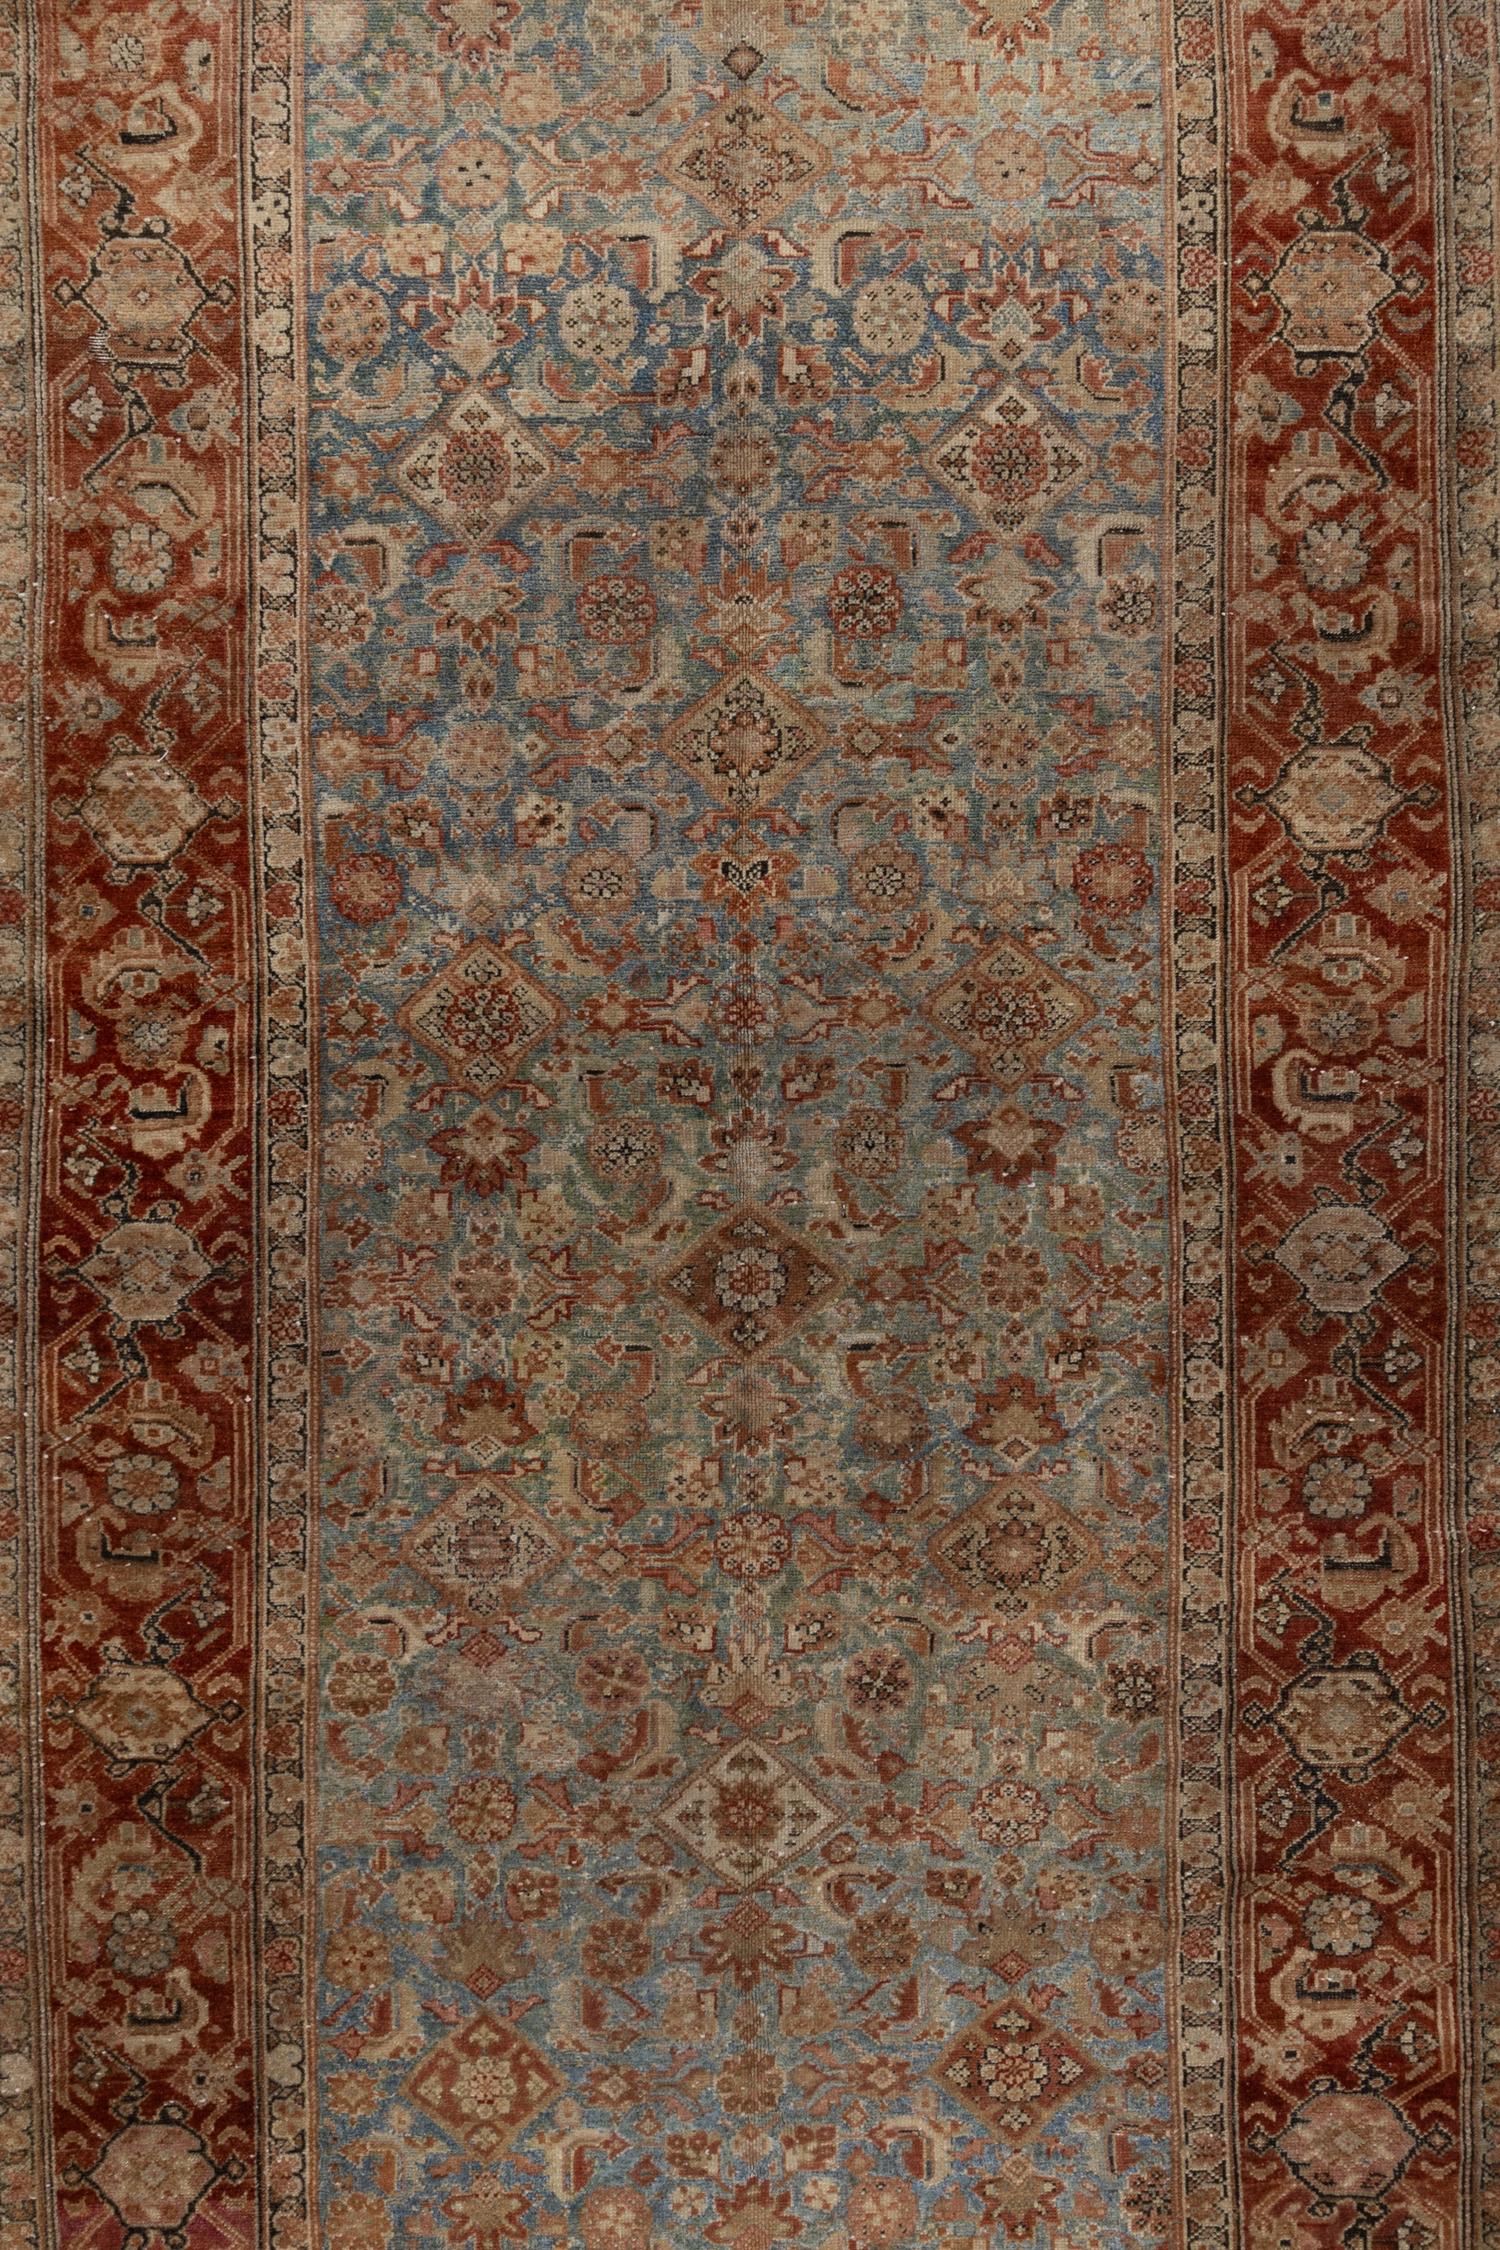 Experience the grace and charm of classic Persian elegance with this exquisite Vintage Malayer Gallery Rug. Handcrafted with the finest wool, the warm, time-softened colors of this luxurious piece will evoke a welcoming atmosphere of sophistication